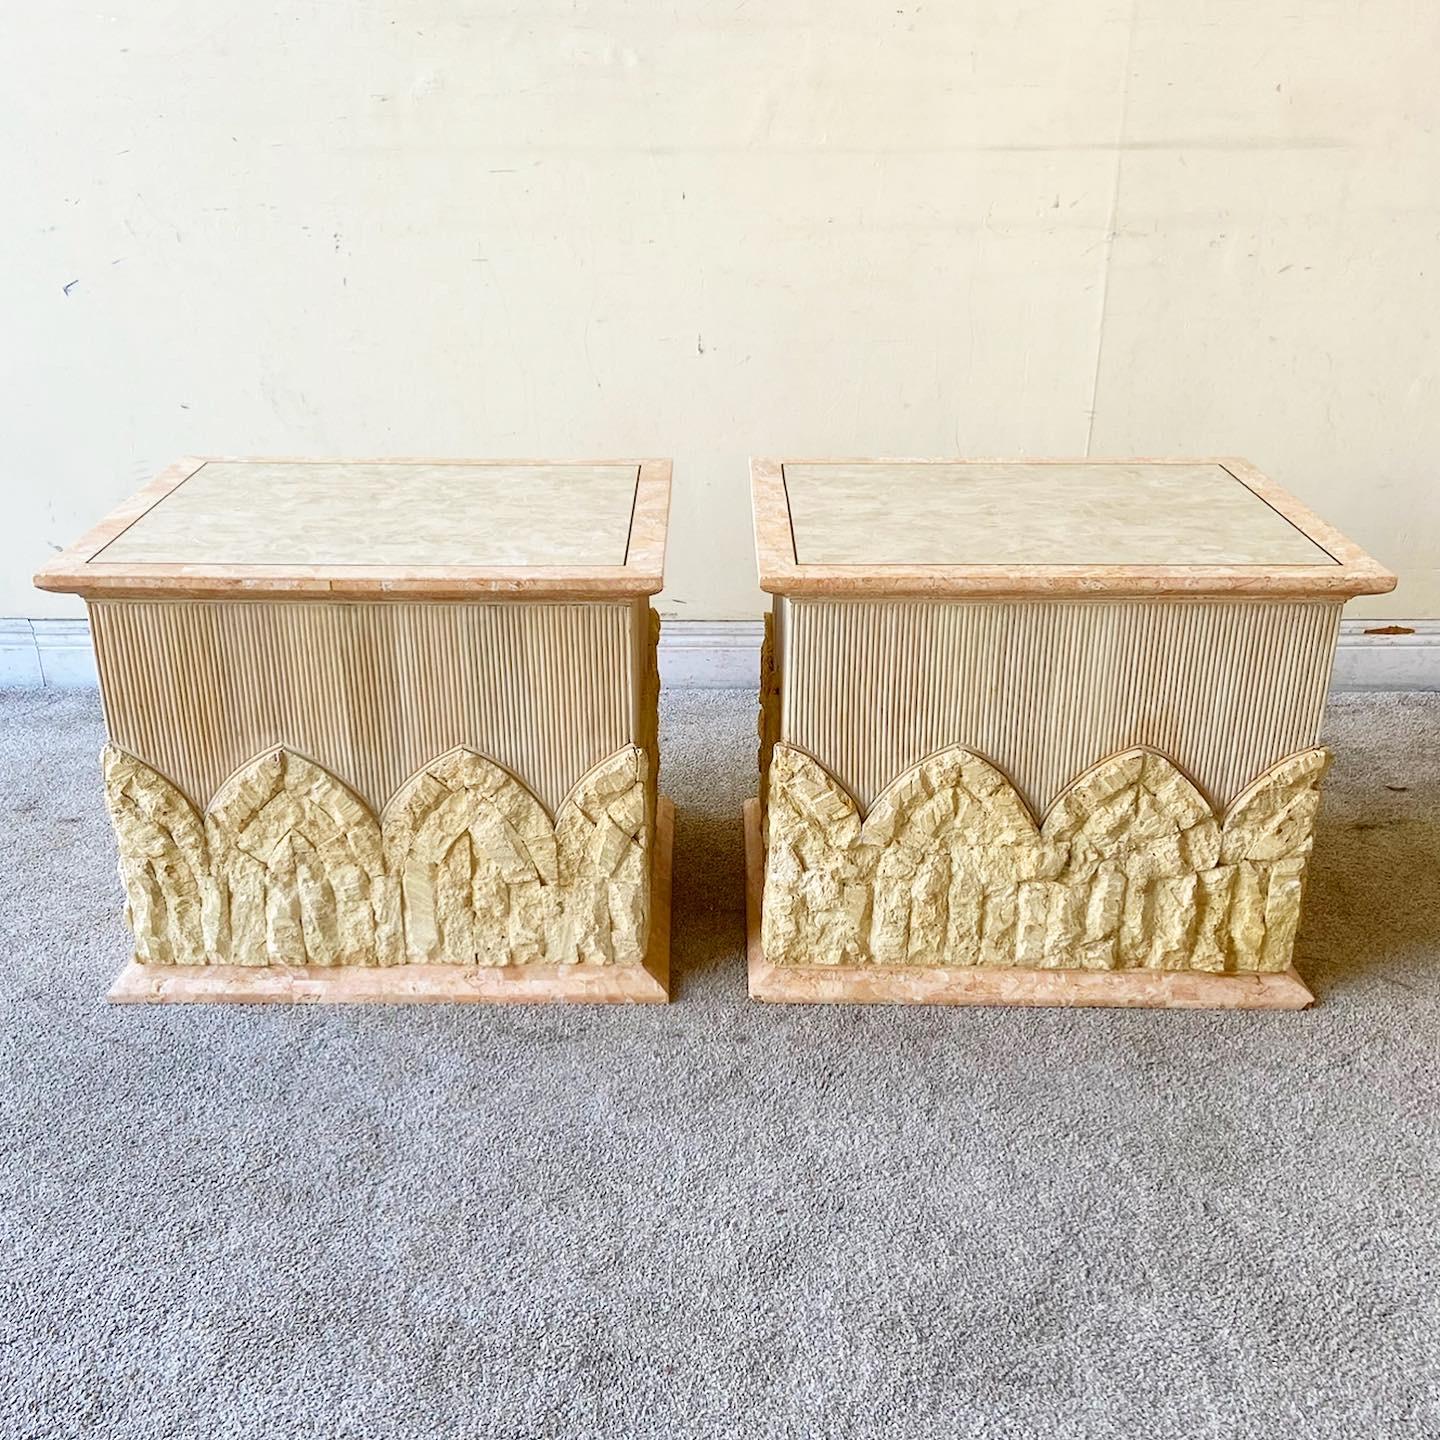 Amazing pair of vintage Postmodern tessellated stone and pencil reed side tables. Each features a pink polished stone around the top and bottom edges. Bothe raw and polished limestone are displayed through the sides and top of the table. The top has